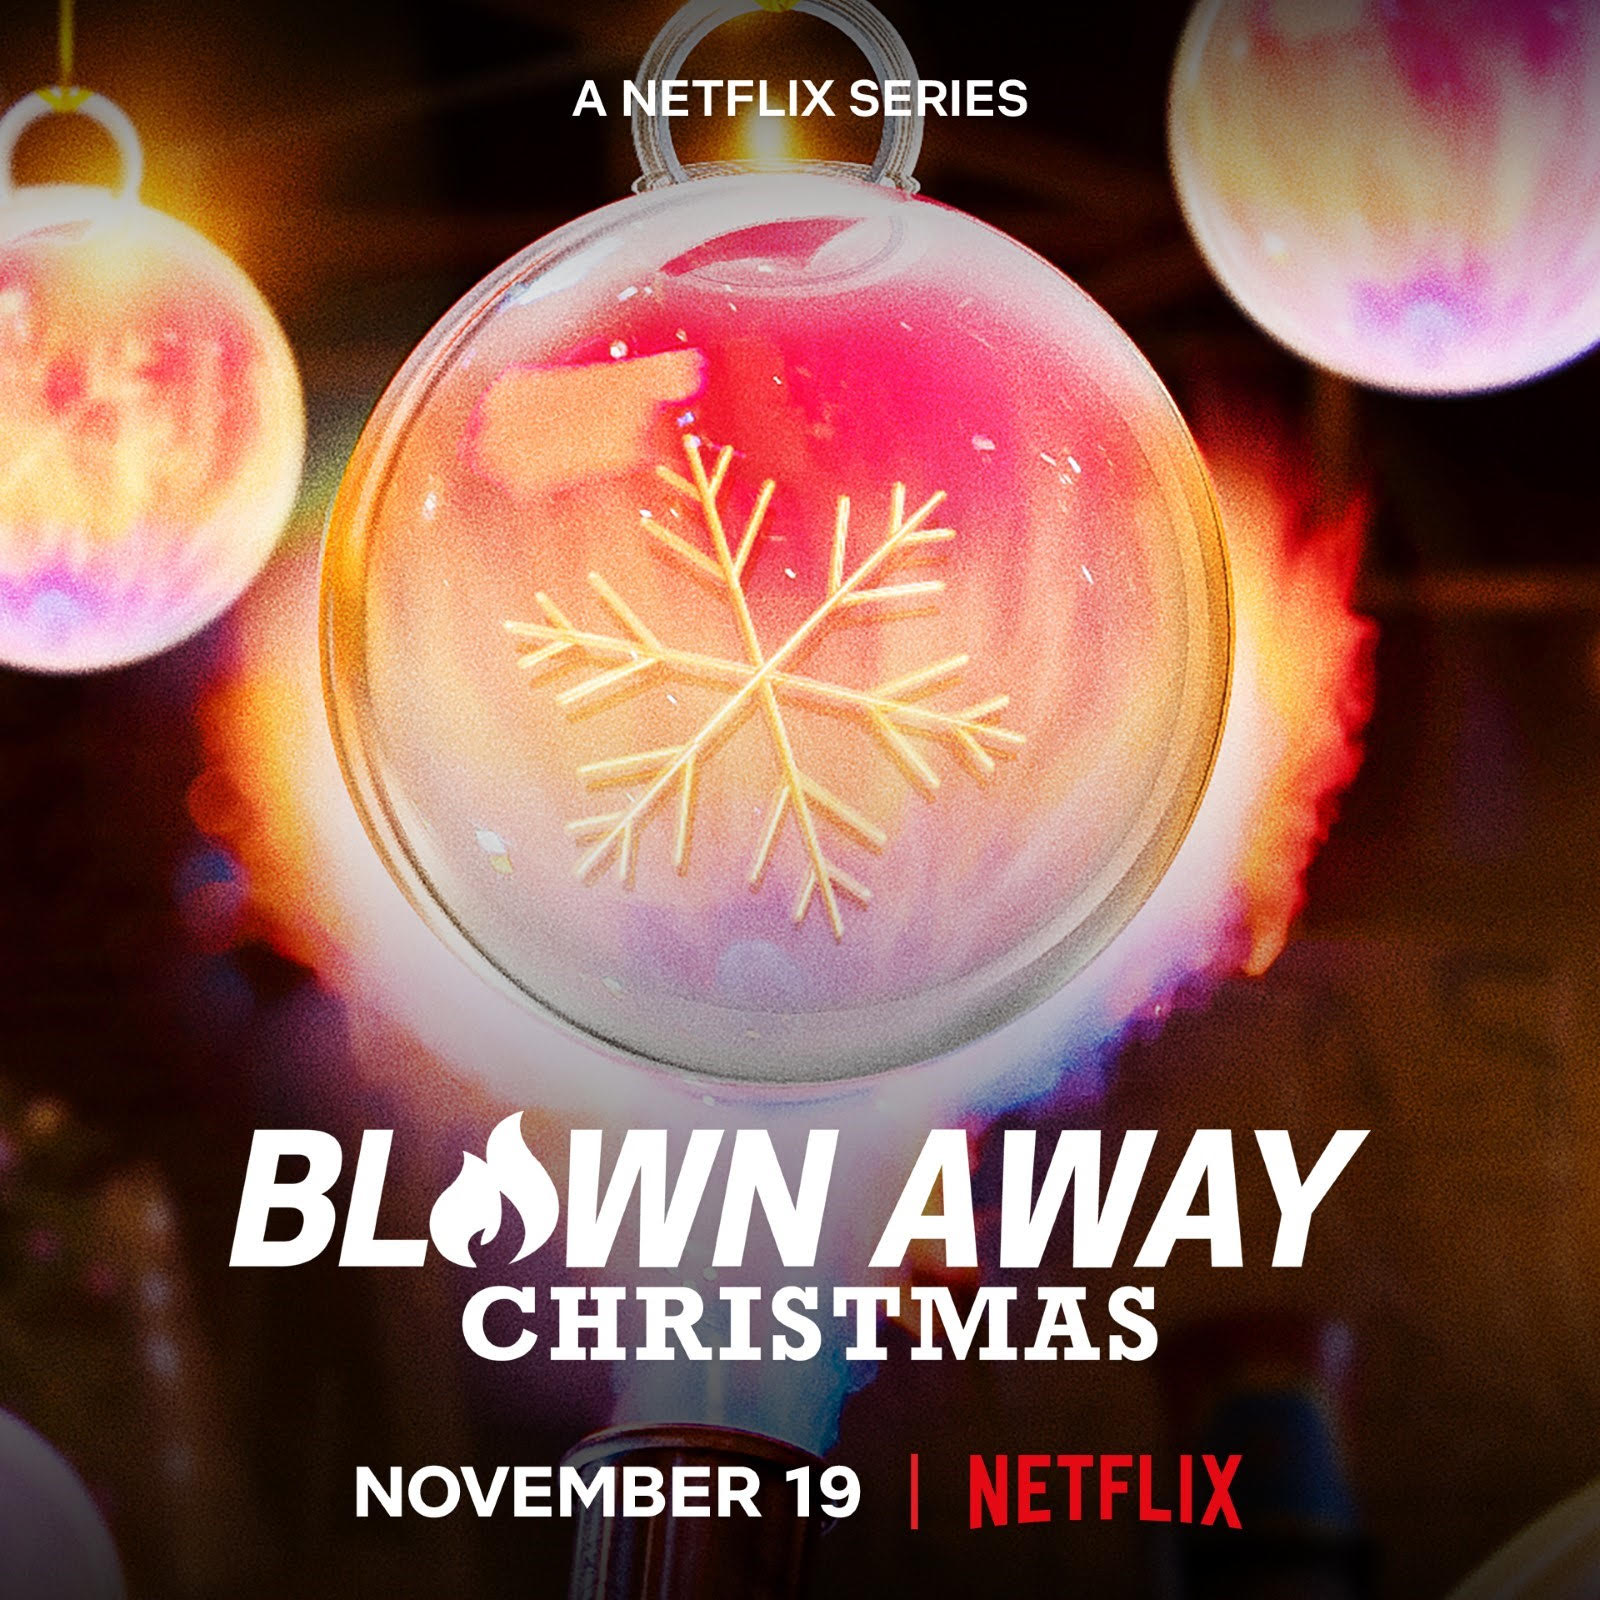 Can we expect the show “Blown Away Christmas” to be available on Netflix